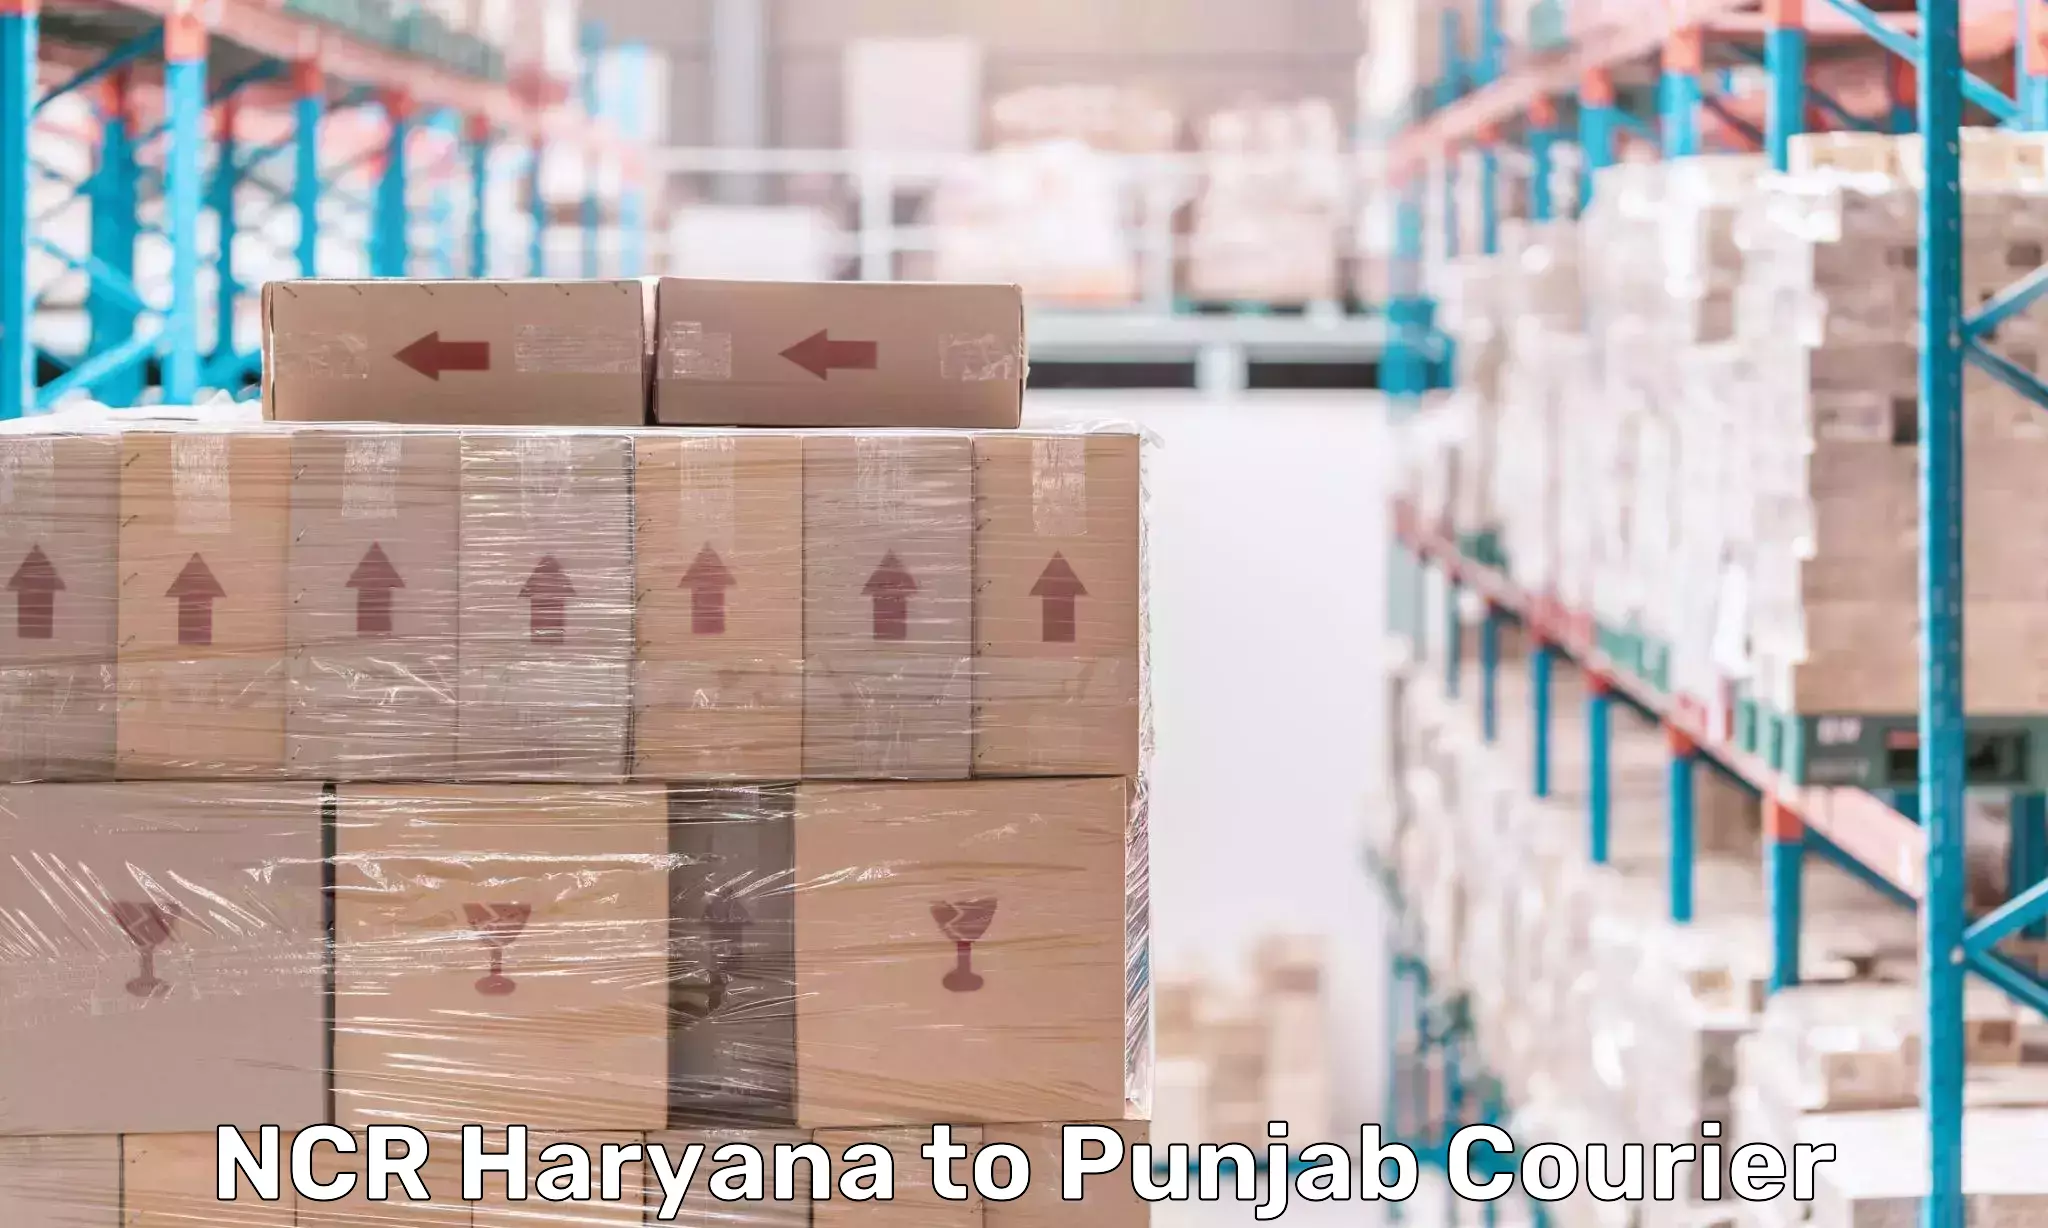 24-hour courier service NCR Haryana to Bathinda